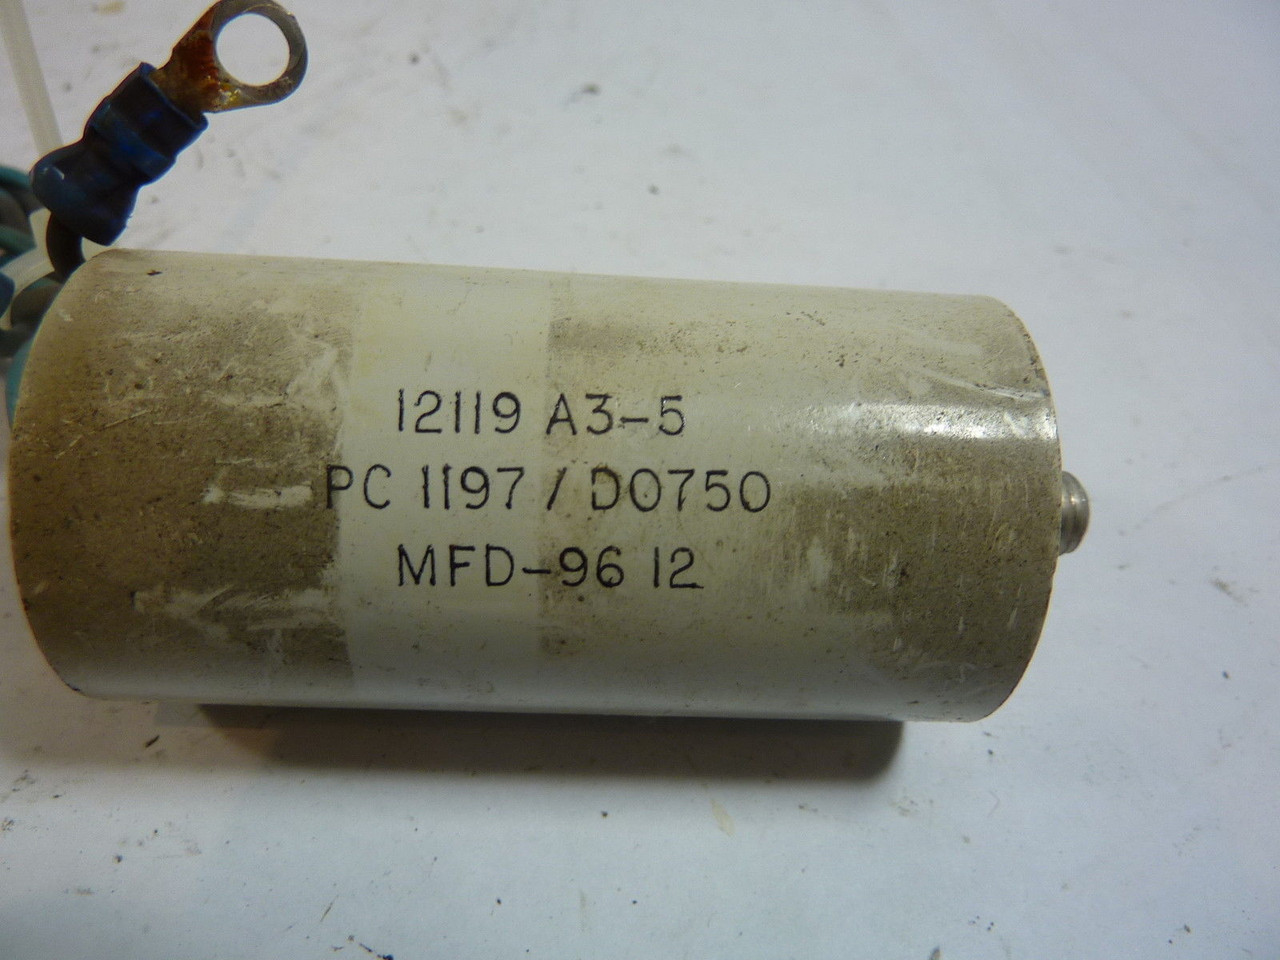 Generic Capacitor Co. 12119-A3-5 Capacitor MFD-9612 USED